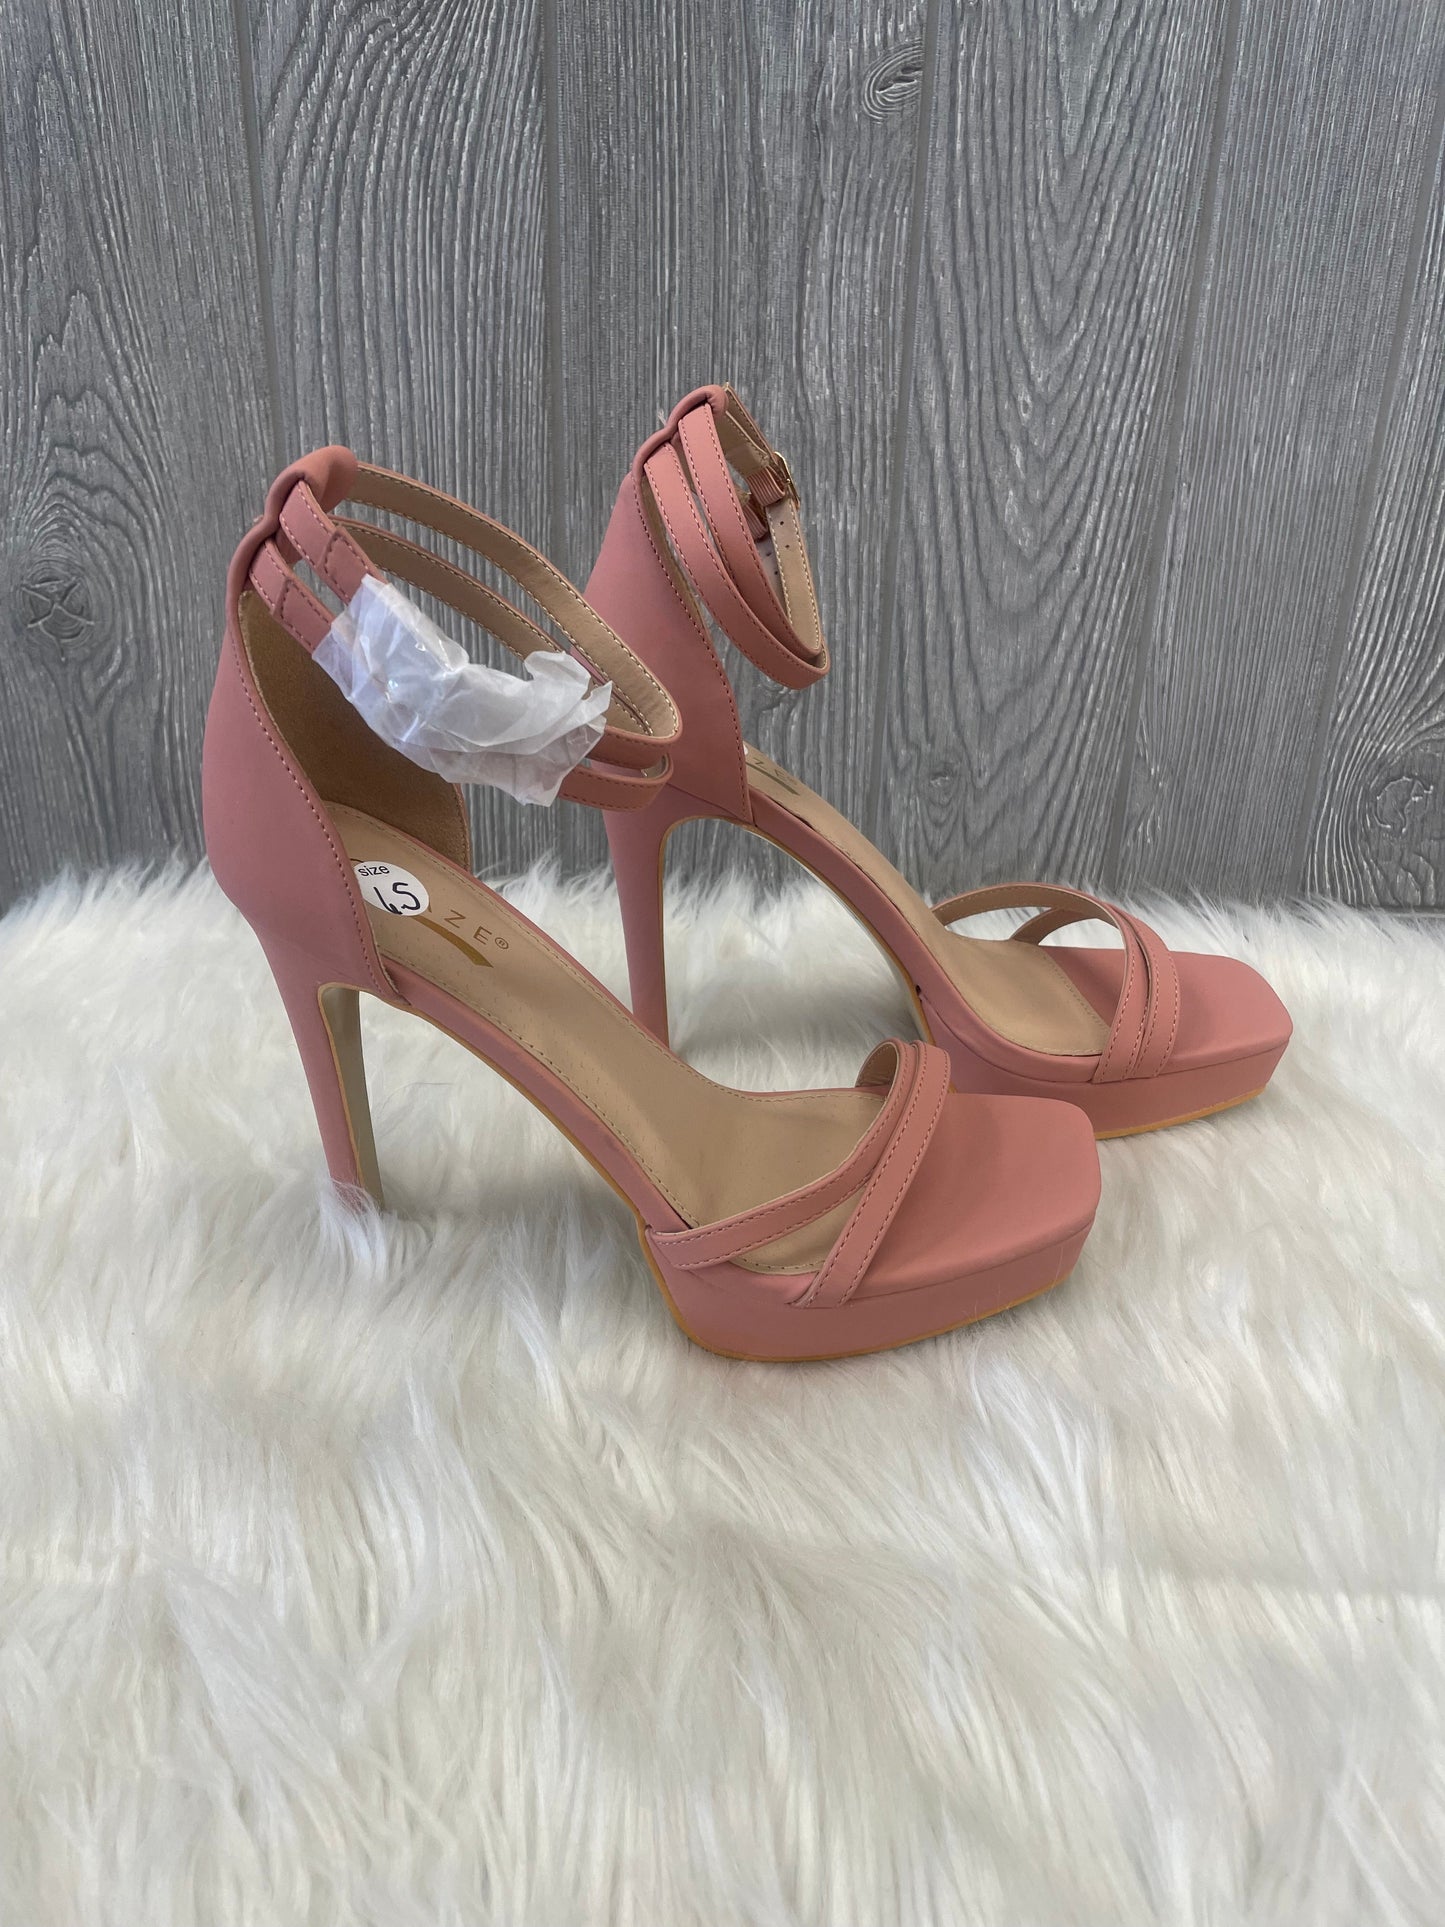 Shoes Heels Stiletto By Clothes Mentor  Size: 6.5